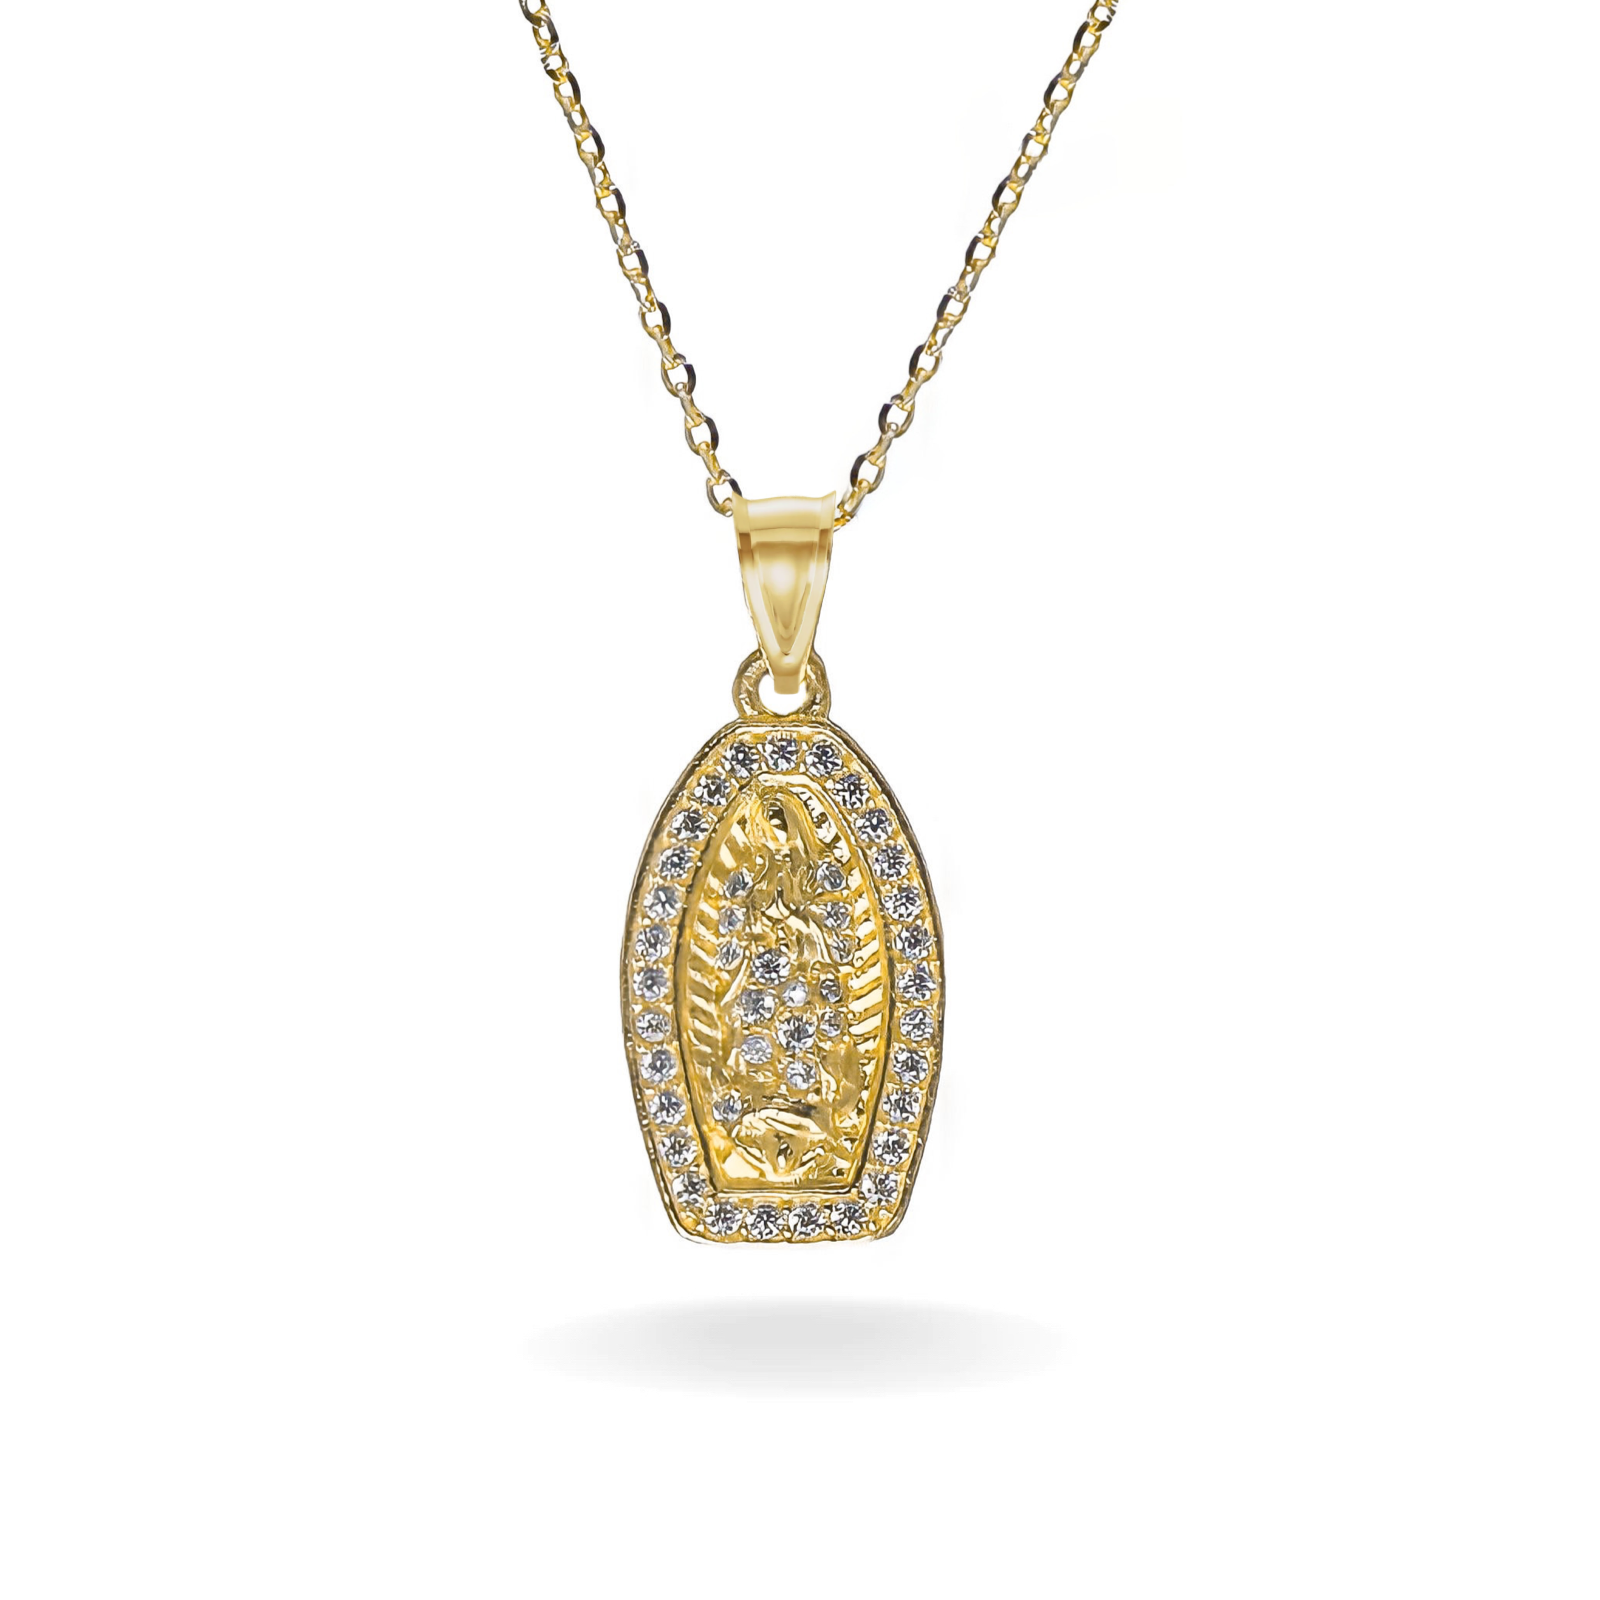 14K YELLOW GOLD PAVE VIRGIN MARY FORM NECKLACE